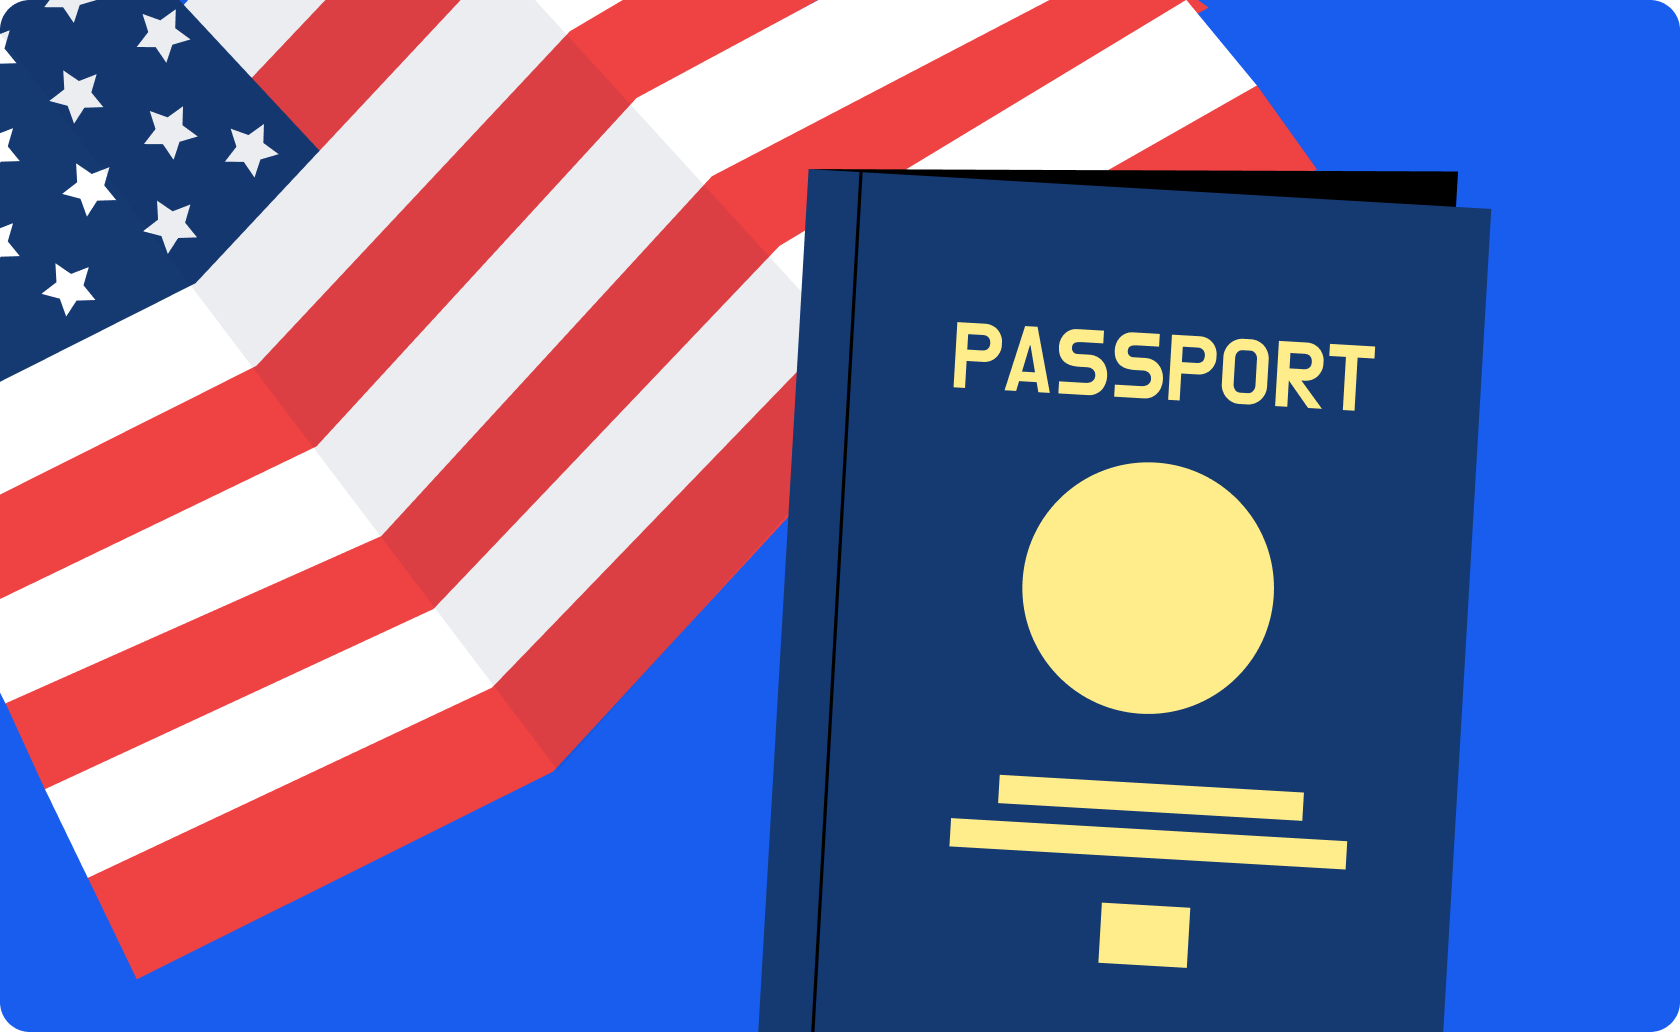 An illustration of a passport with the American flag in the background